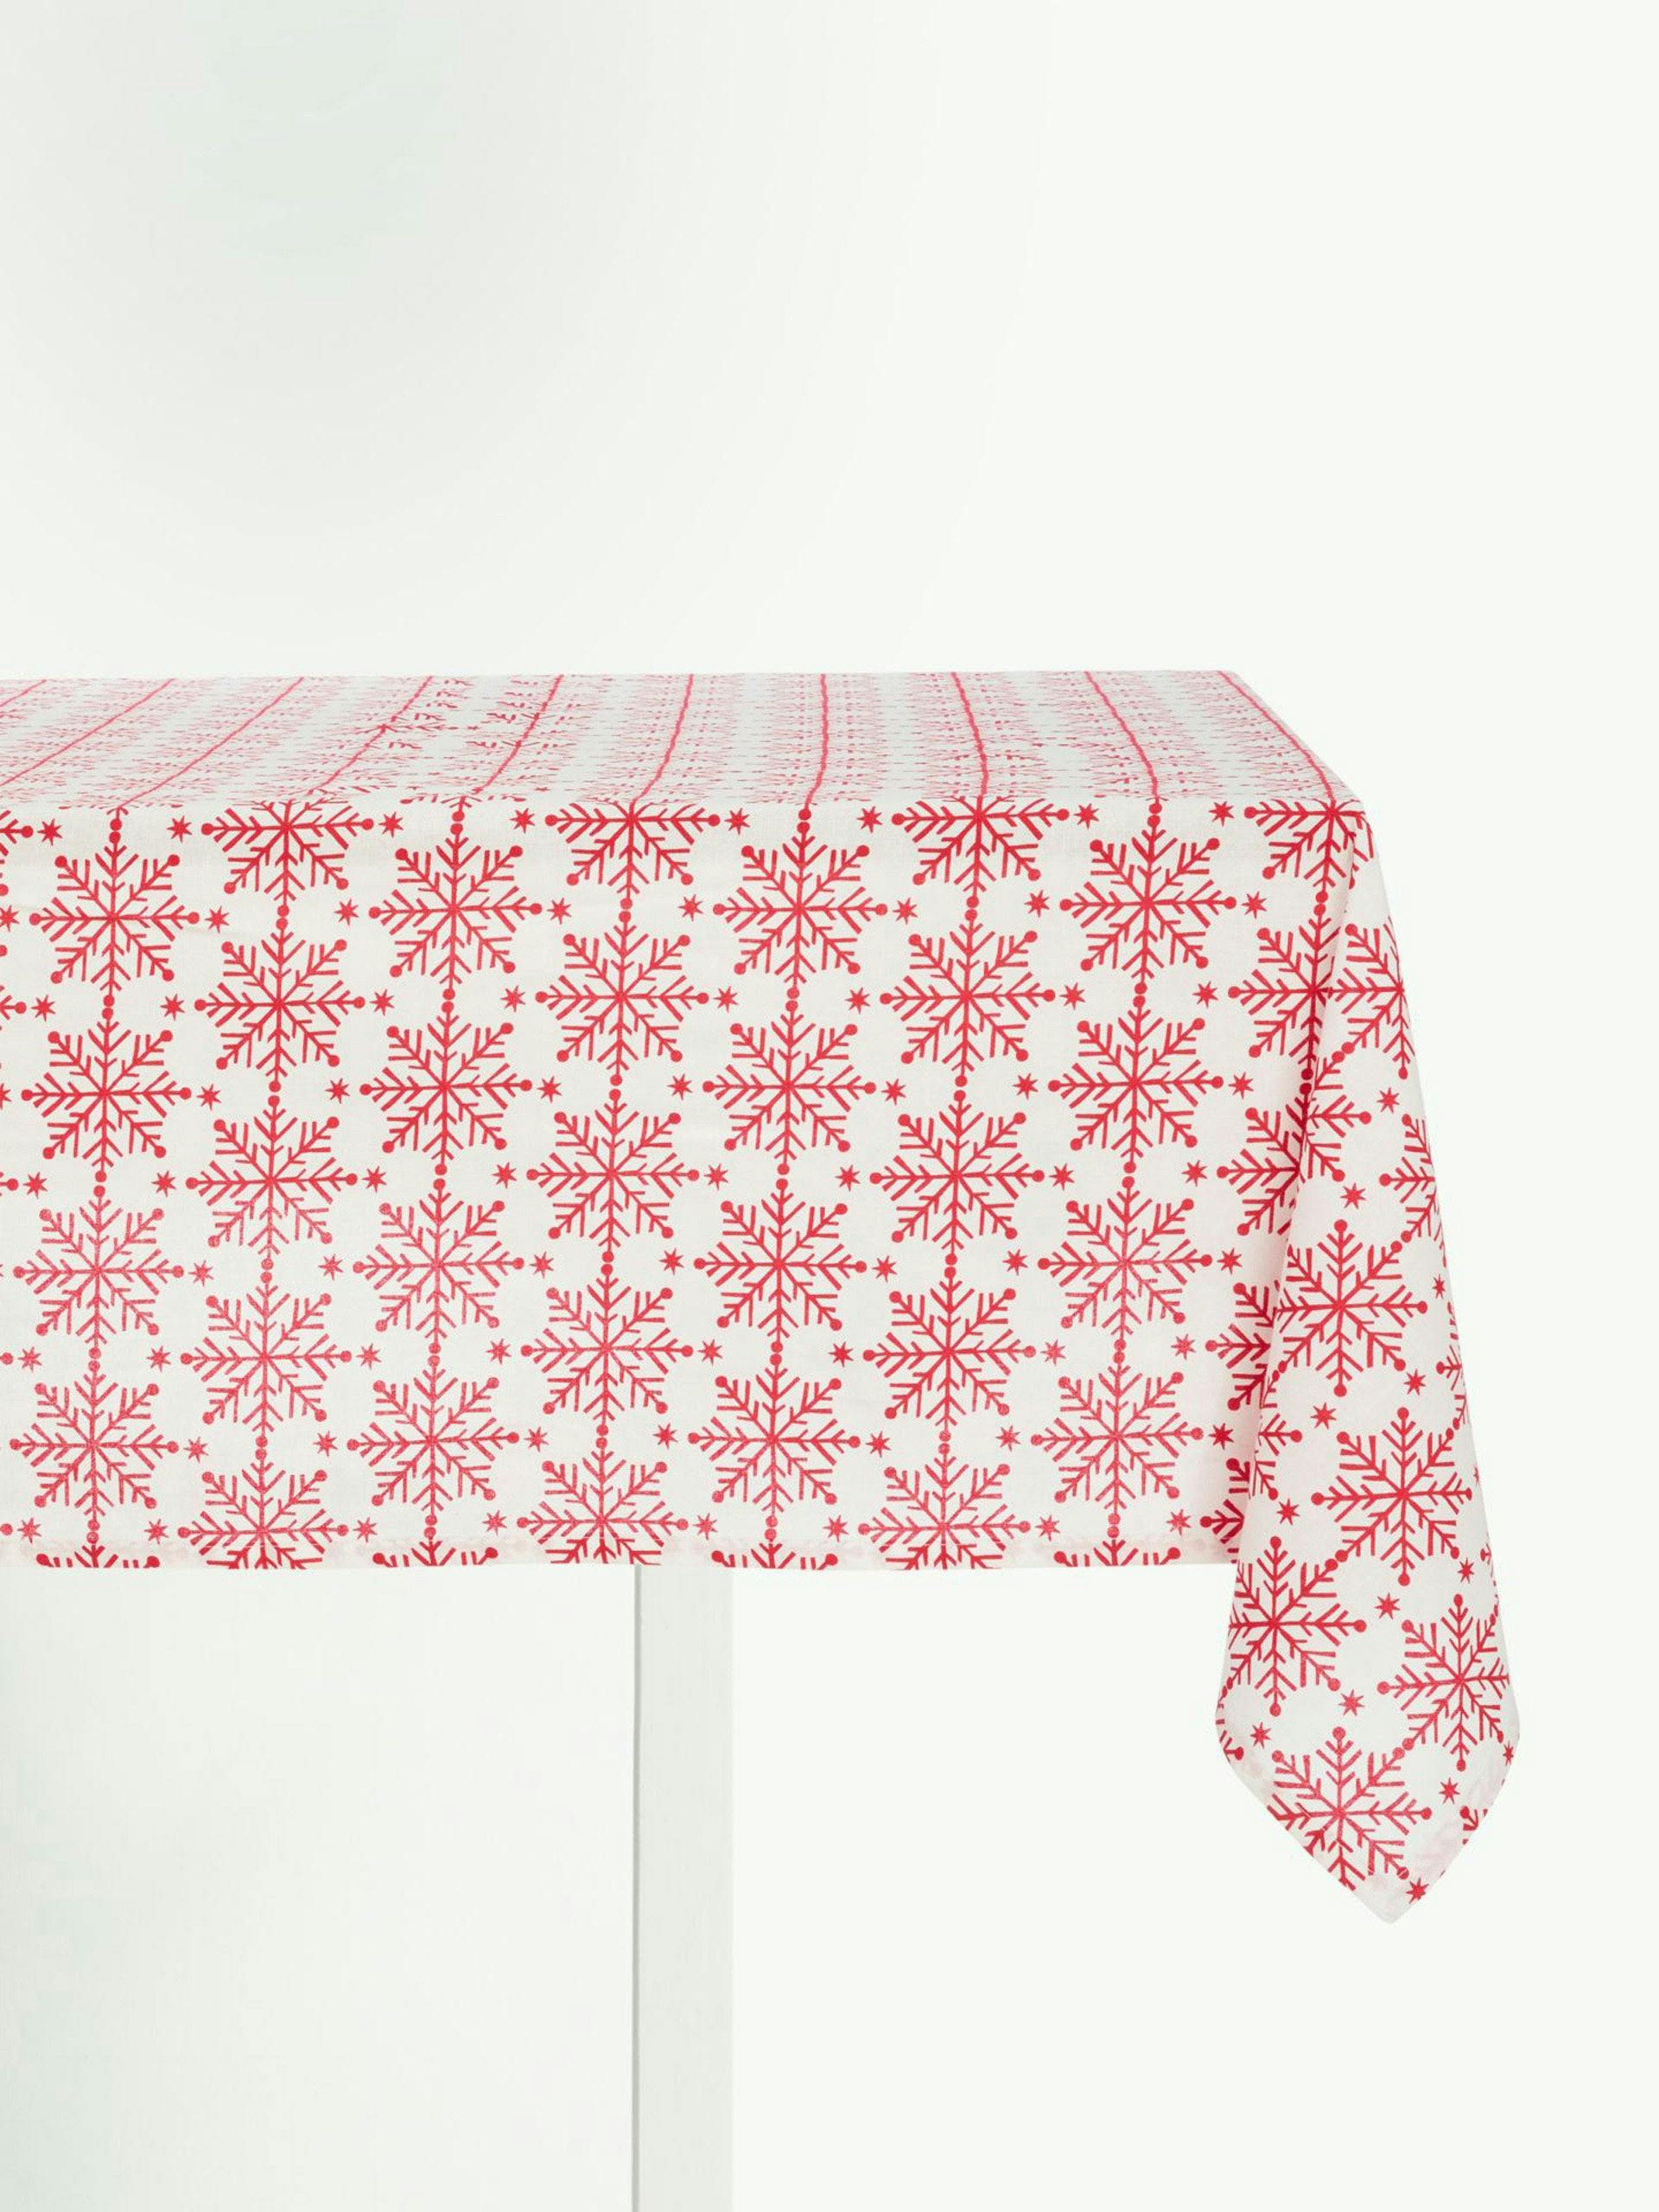 Cotton tablecloth with snowflake design